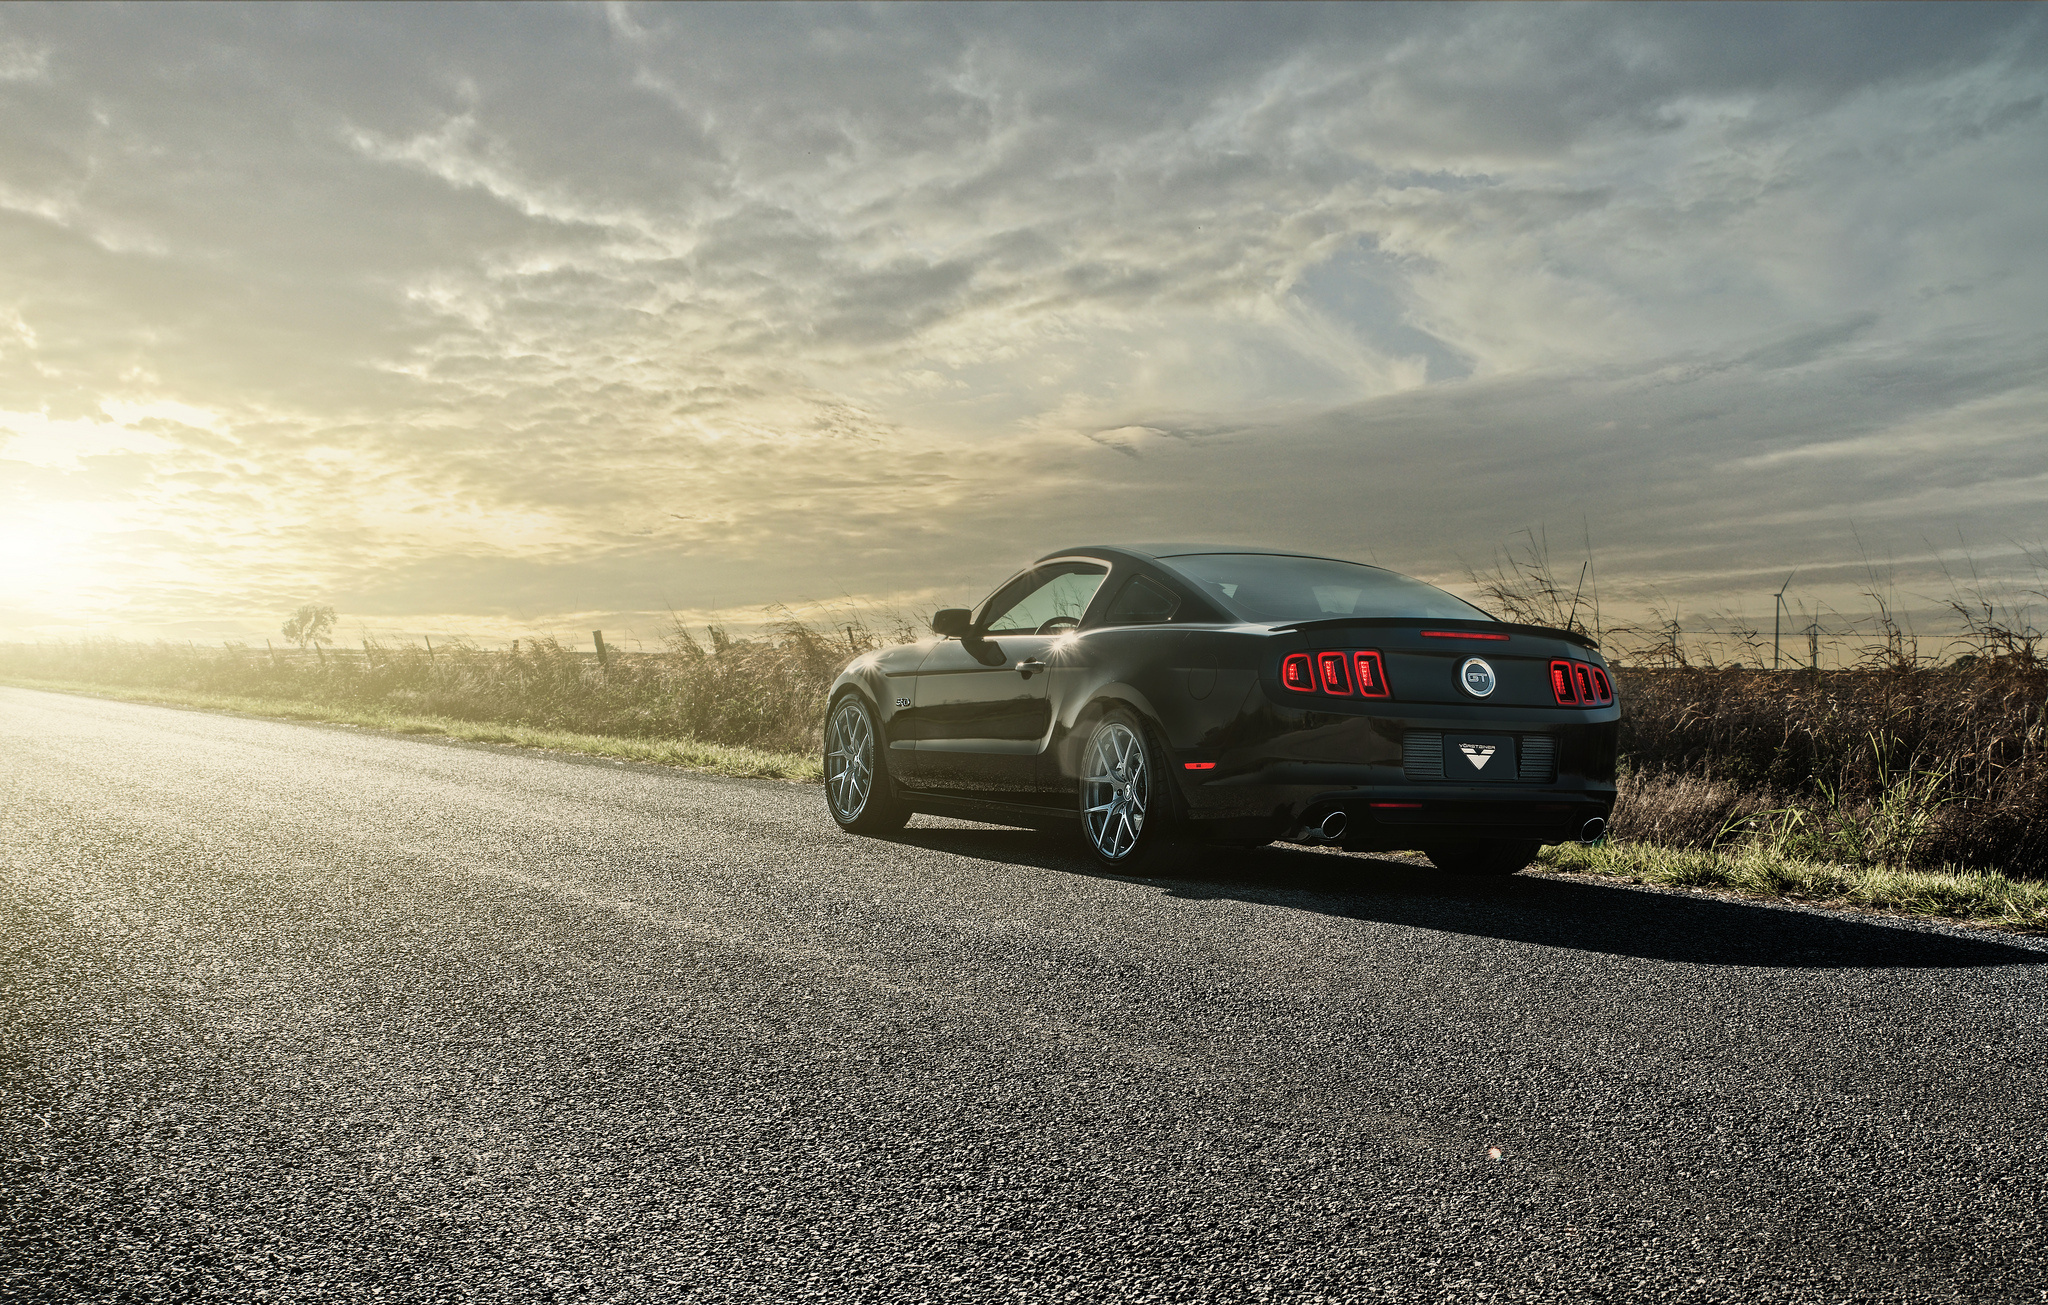 Lock Screen PC Wallpaper auto, mustang, cars, shine, light, road, back view, rear view, gt